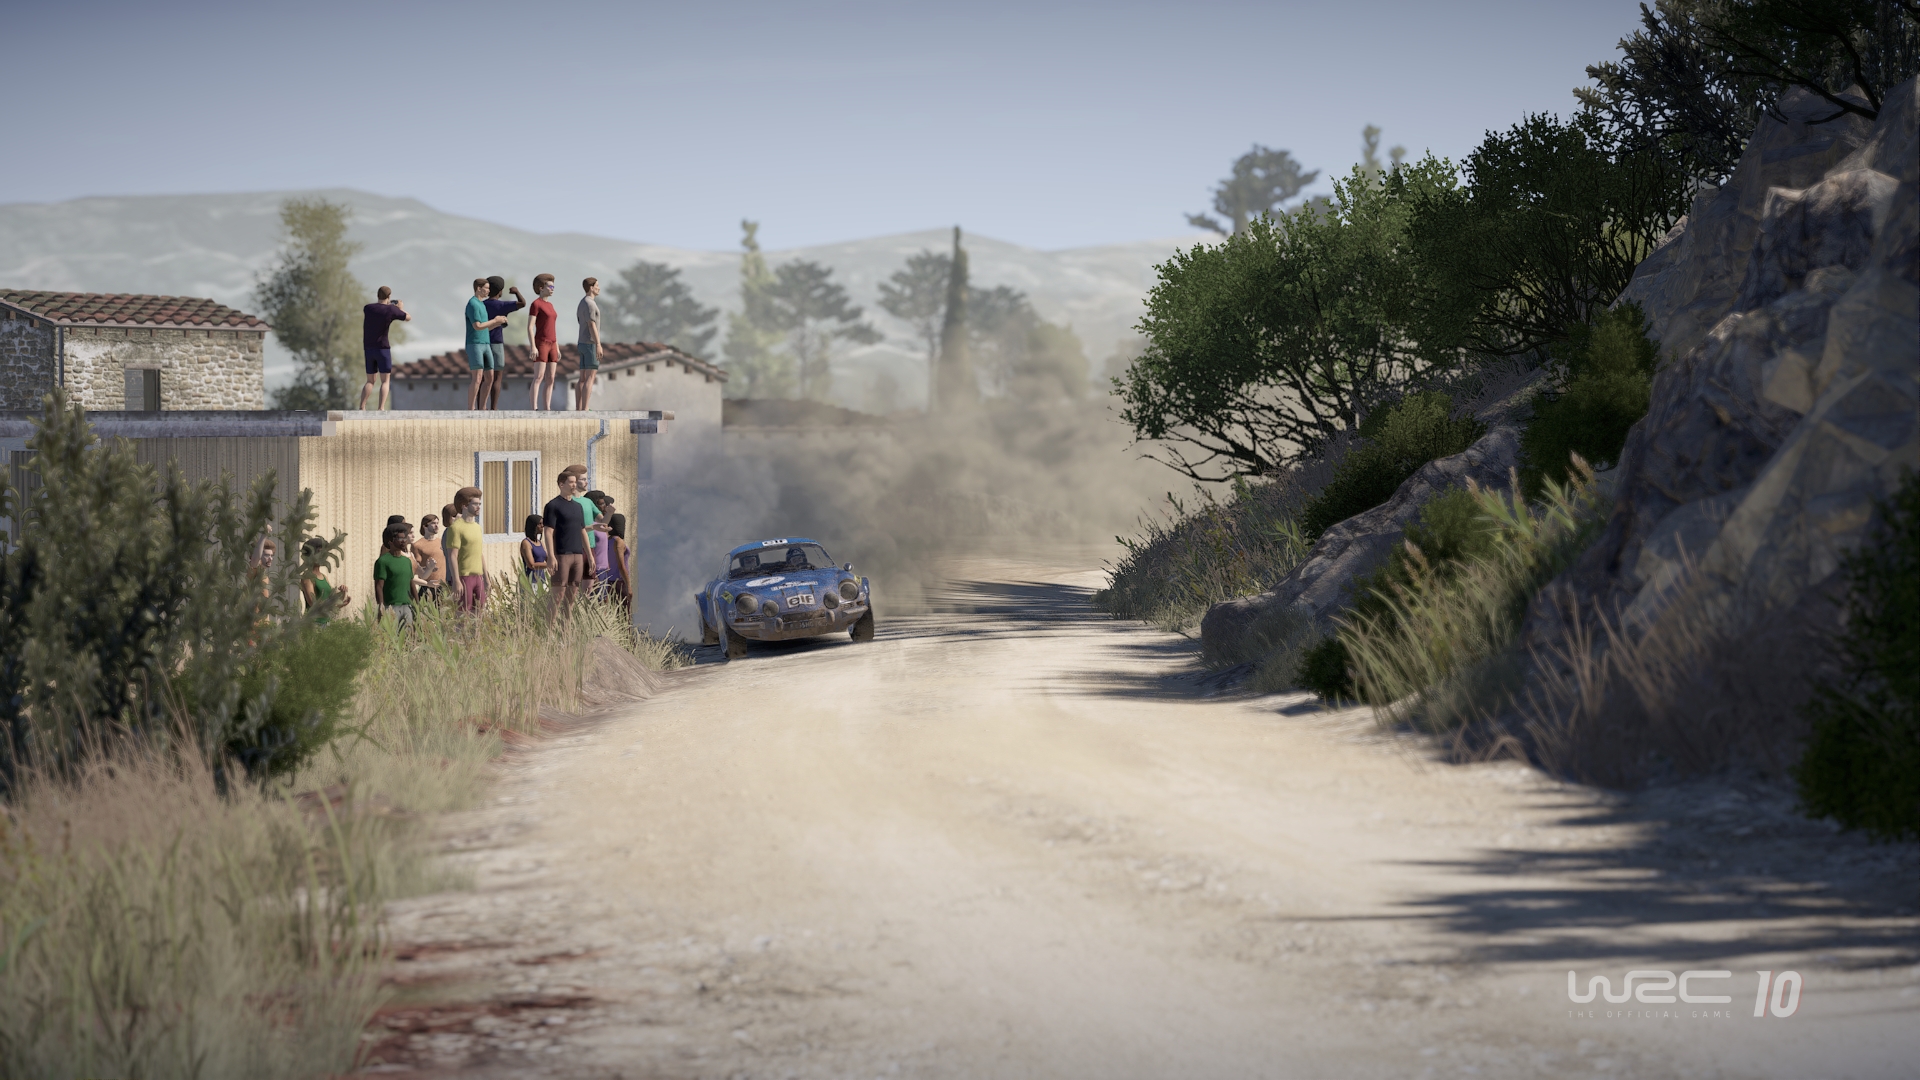 https://www.playstationlifestyle.net/wp-content/uploads/sites/9/2021/10/wrc-10-ps5-review-09.jpg